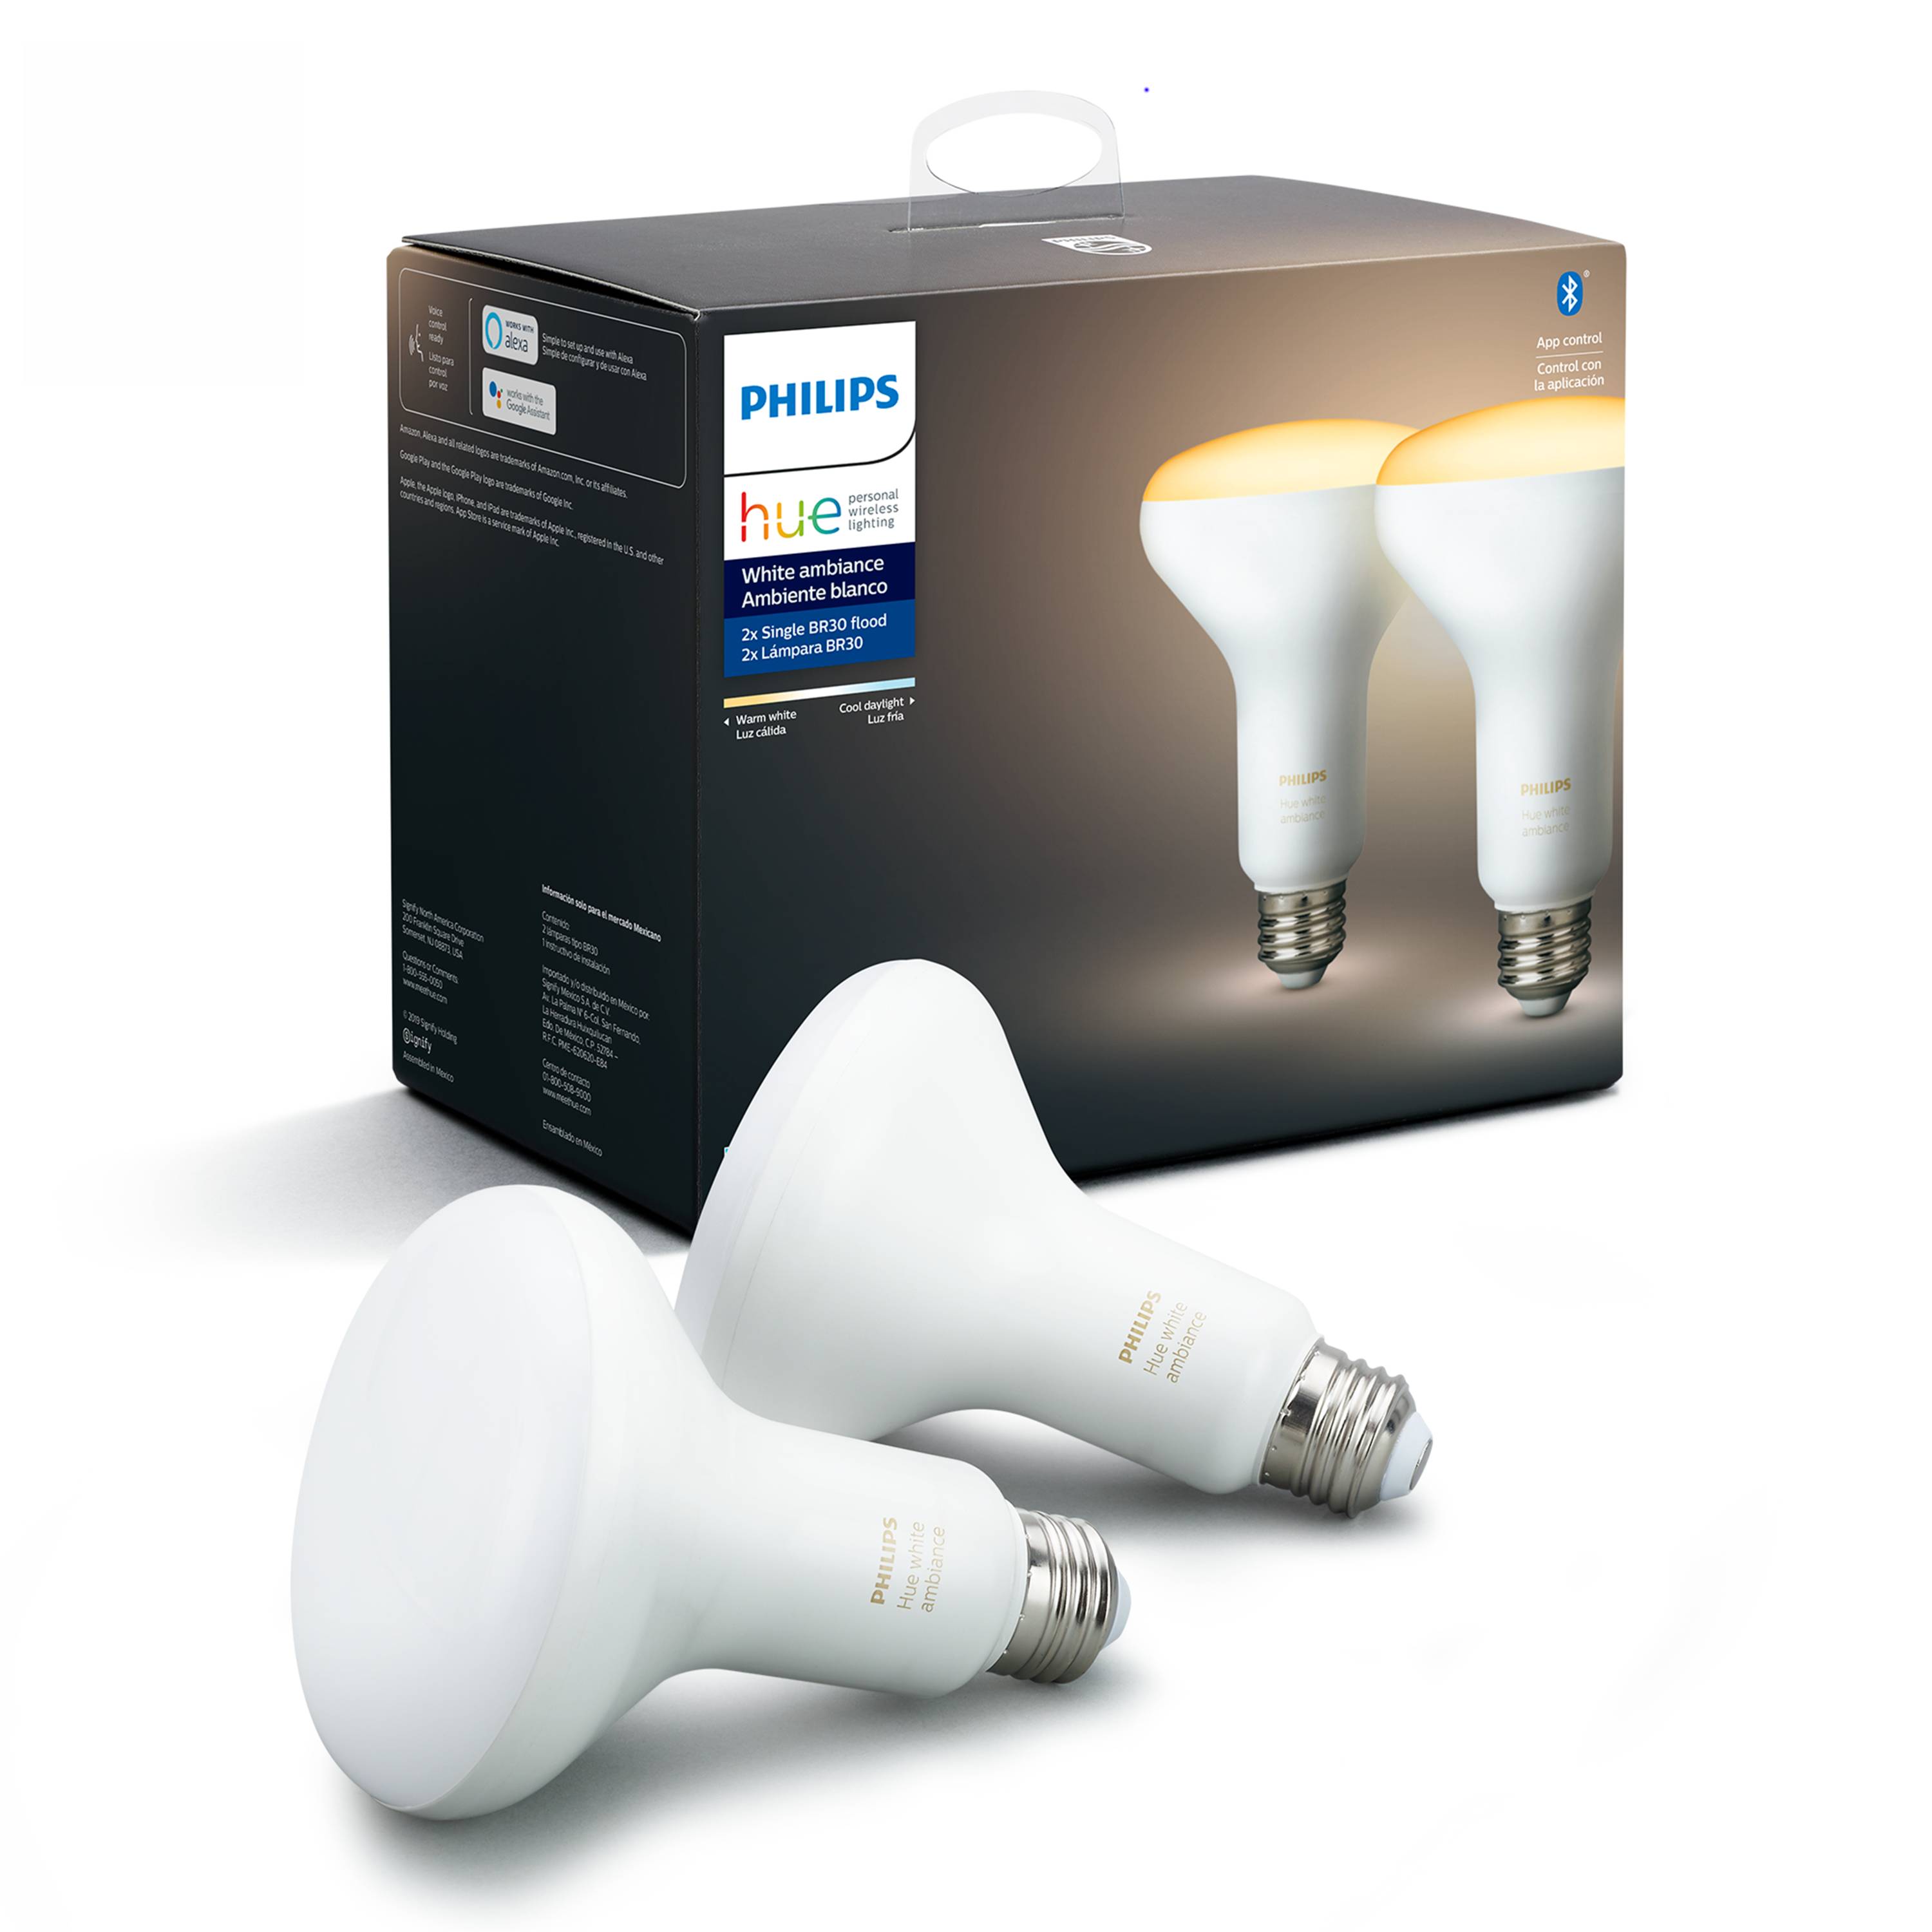 Philips 65-Watt EQ BR30 Tunable White E26 Dimmable Smart Light Bulb (2-Pack) Lowes.com